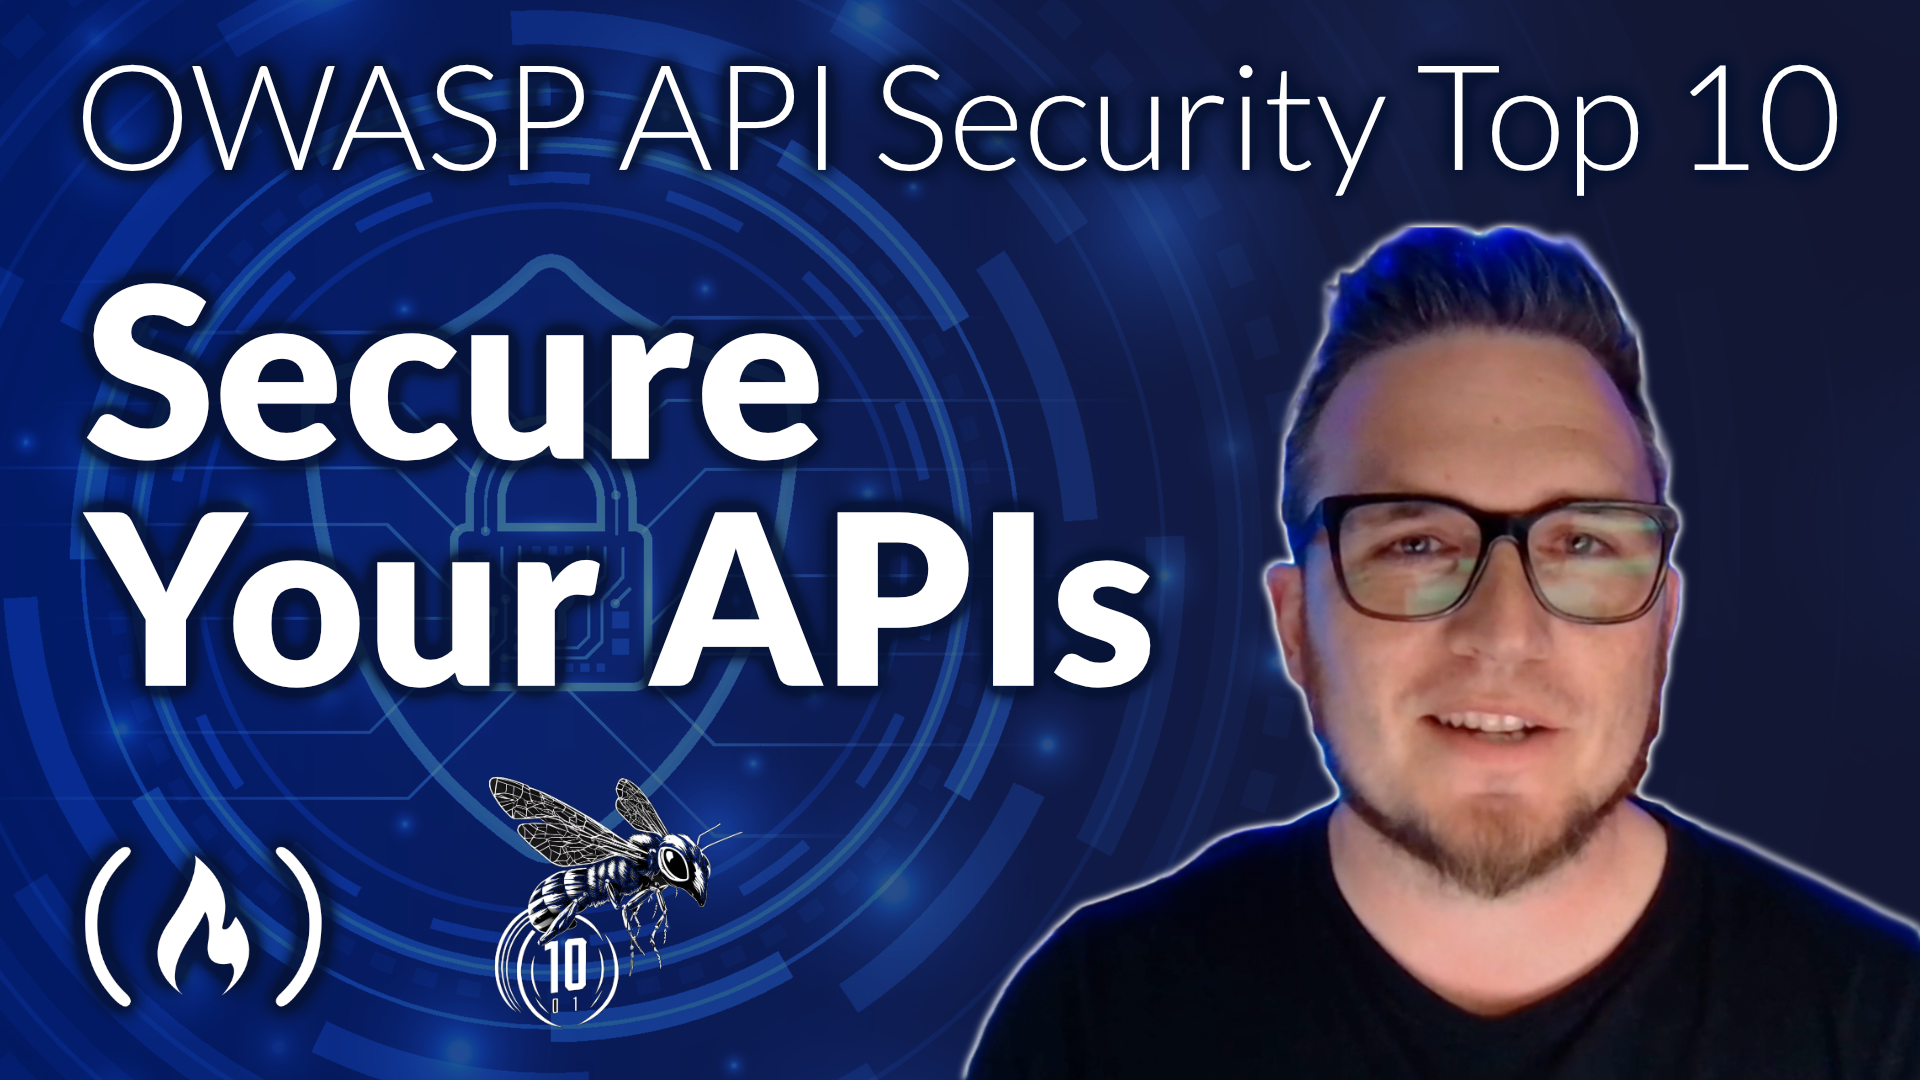 Image for OWASP API Security Top 10 – Secure Your APIs